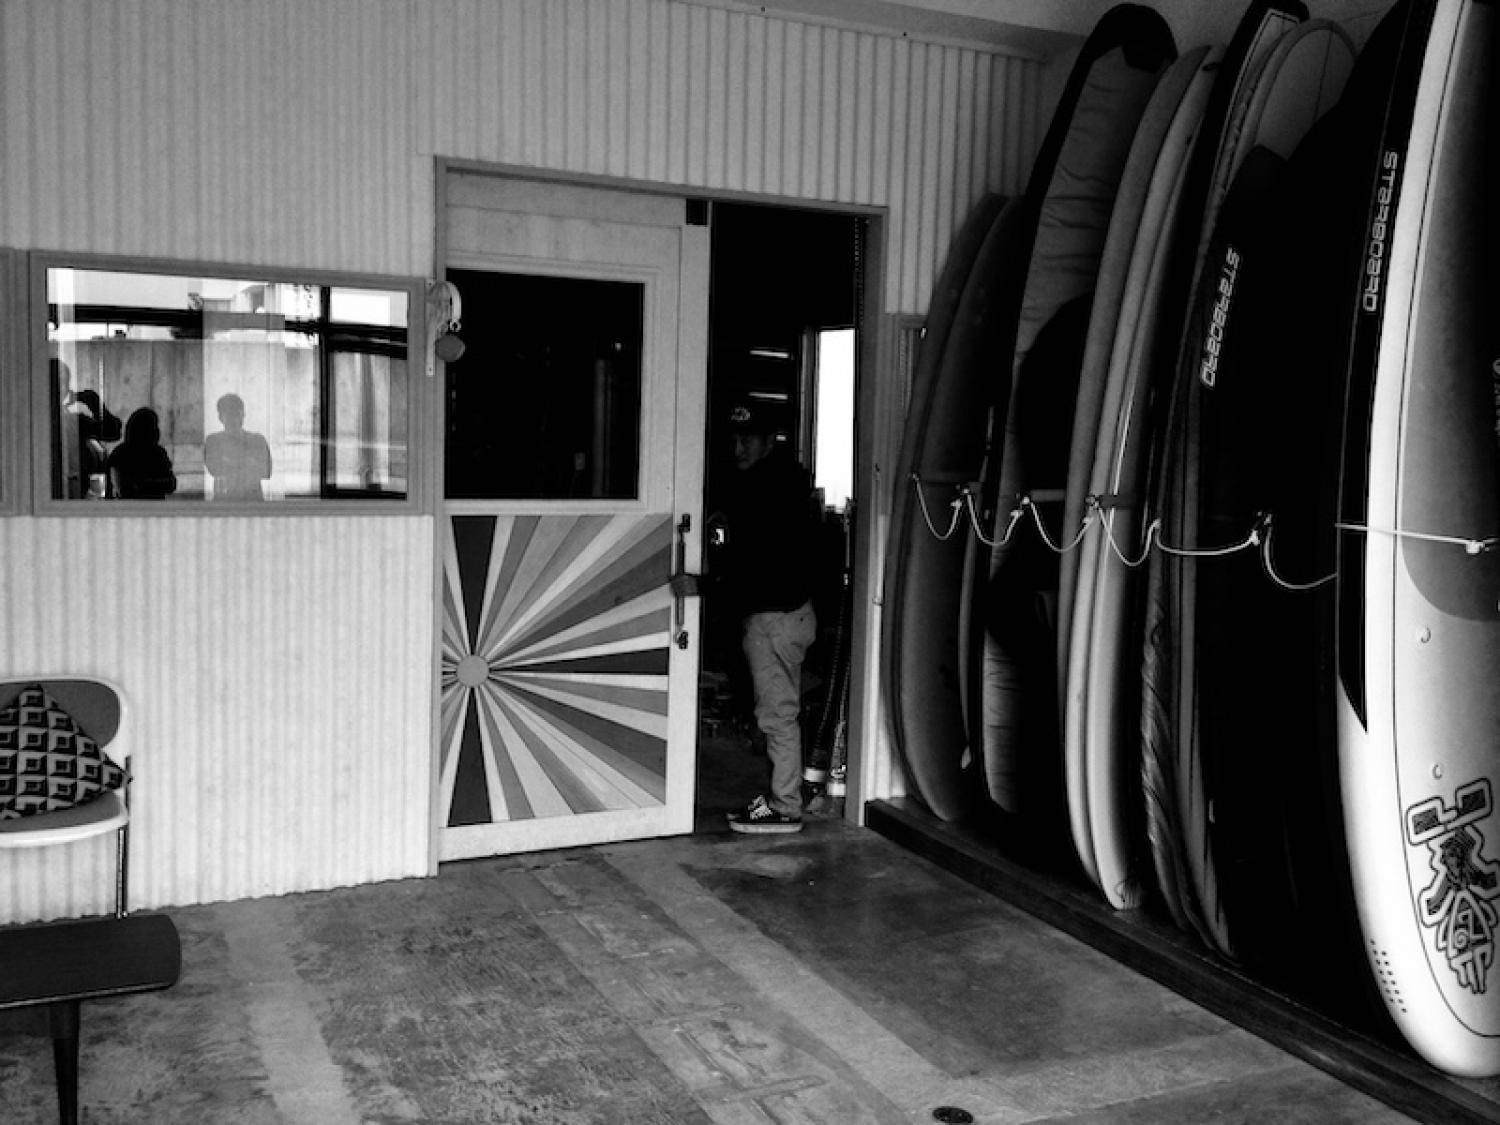 The Strage The Starge Room For your Surfboards Stand up paddle Boards and Gears 1